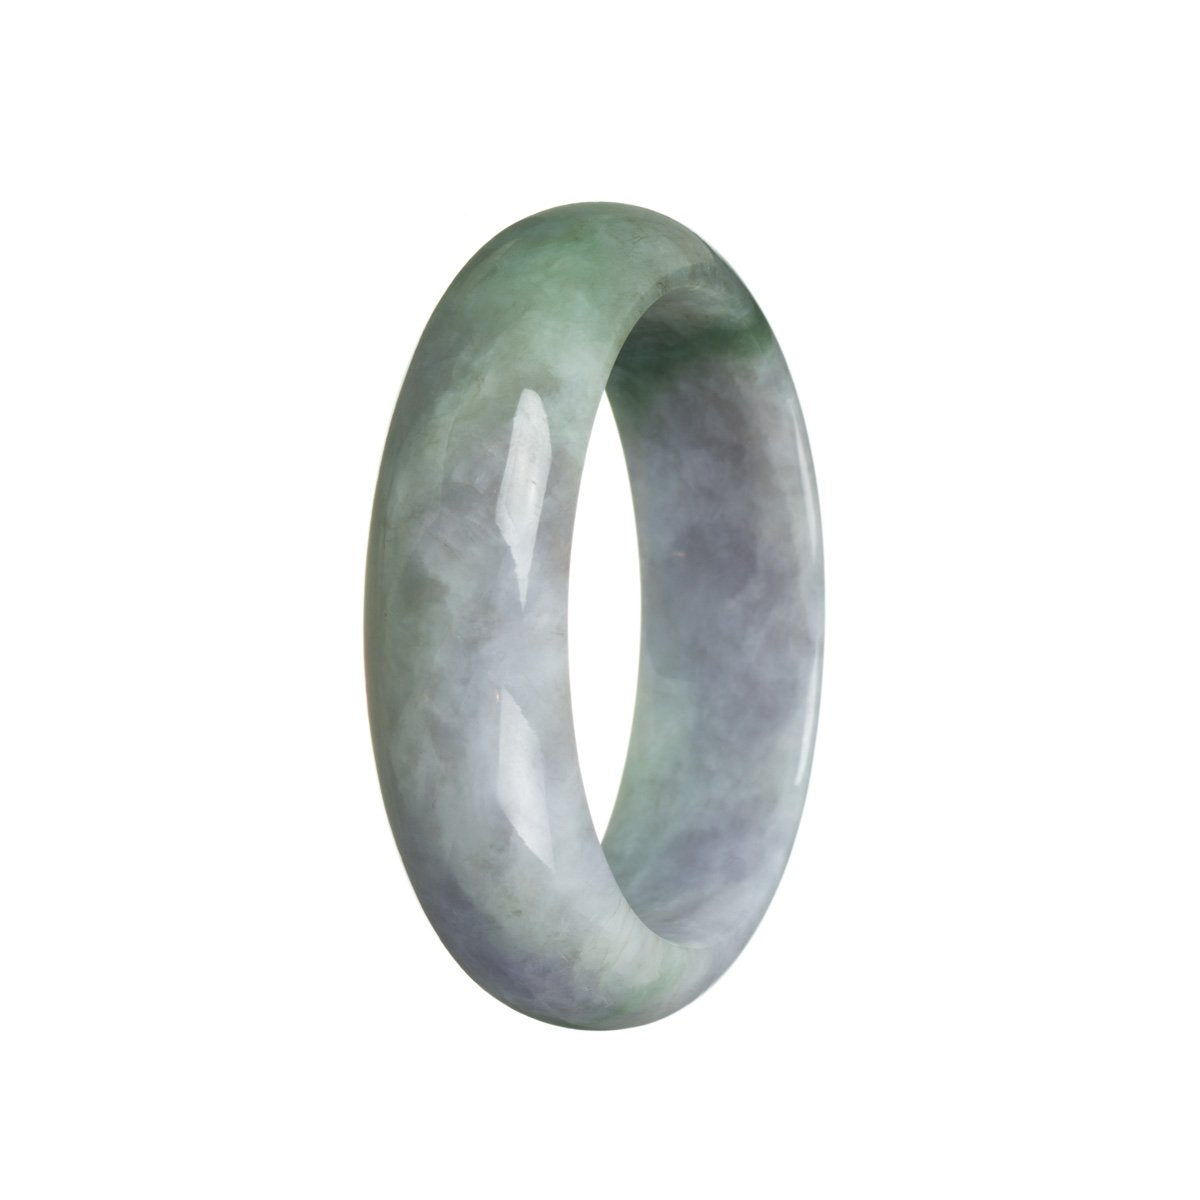 A close-up photo of a lavender-colored jade bracelet with a half moon shape. The bracelet is made with genuine, untreated lavender jade and features a traditional green jade bead.